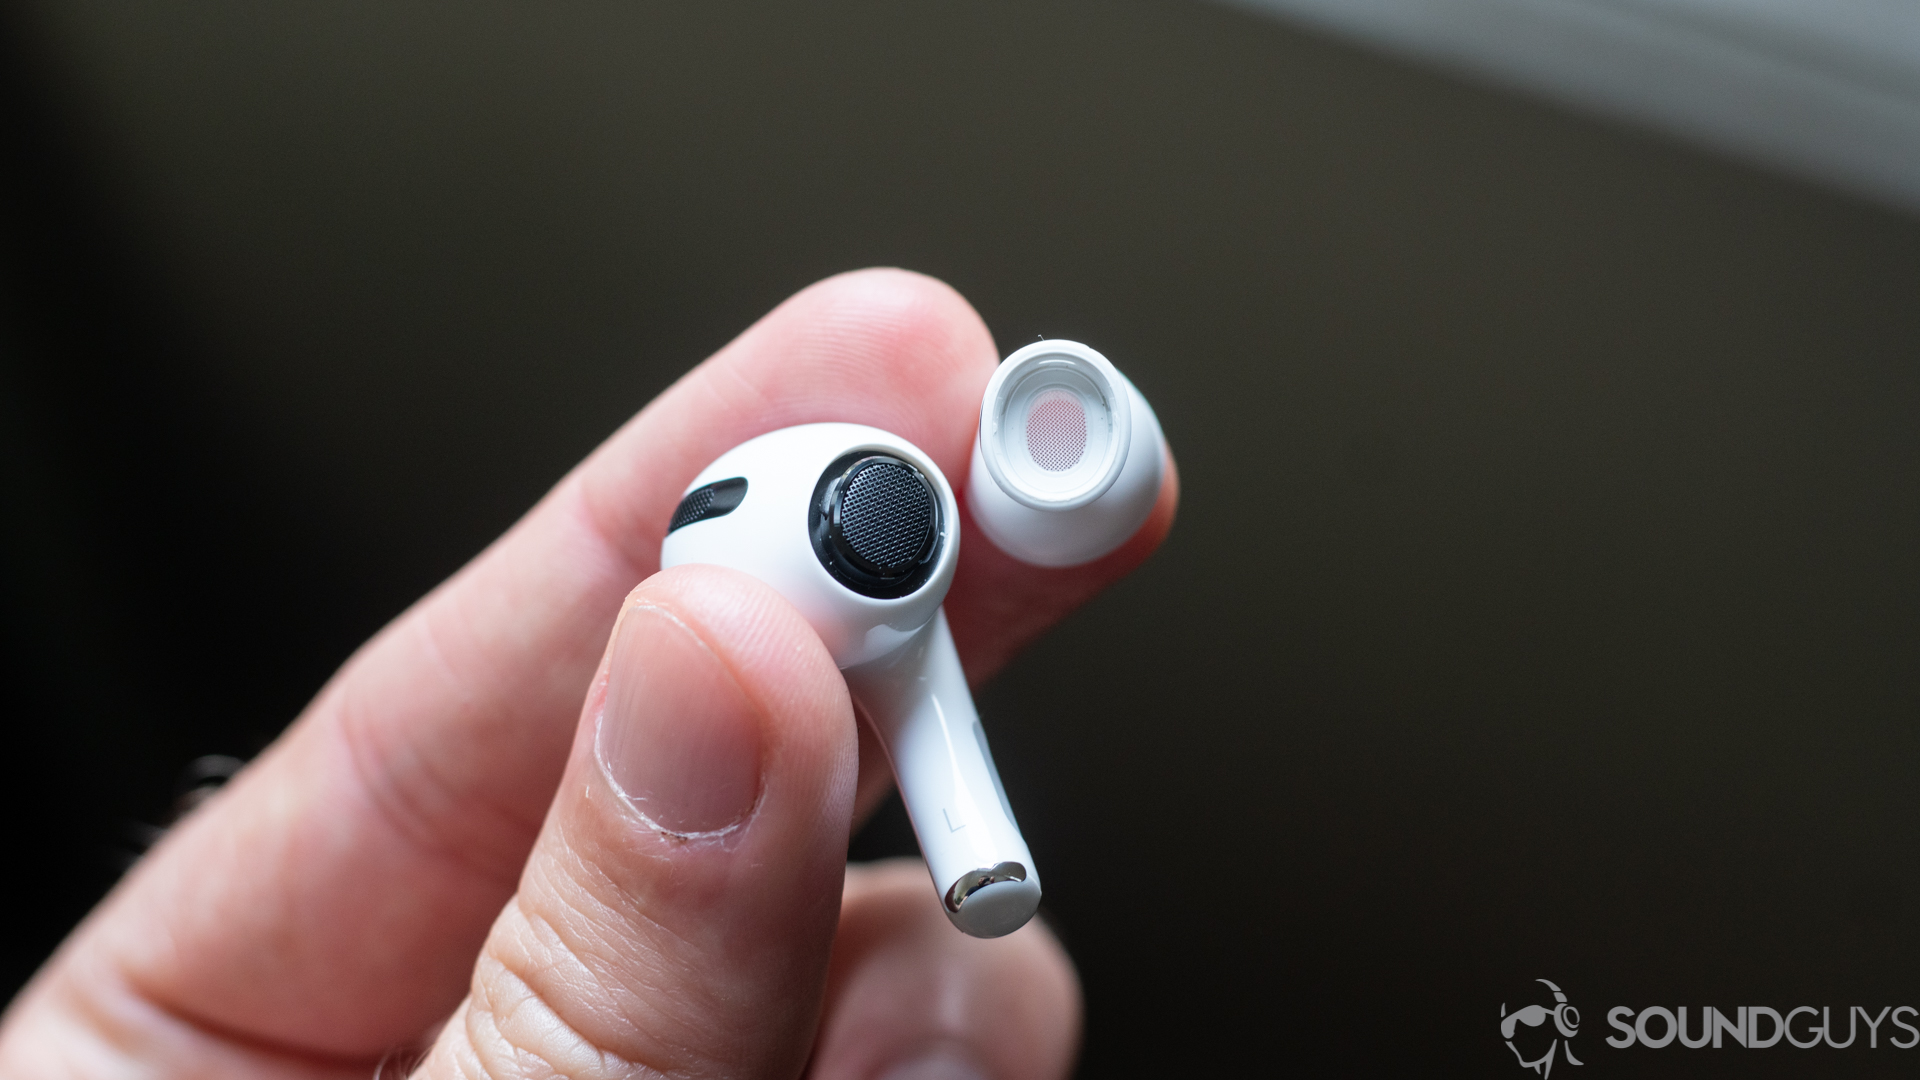 A picture of the AirPods Pro earbud with the silicone sleeve removed to reveal the nozzle.